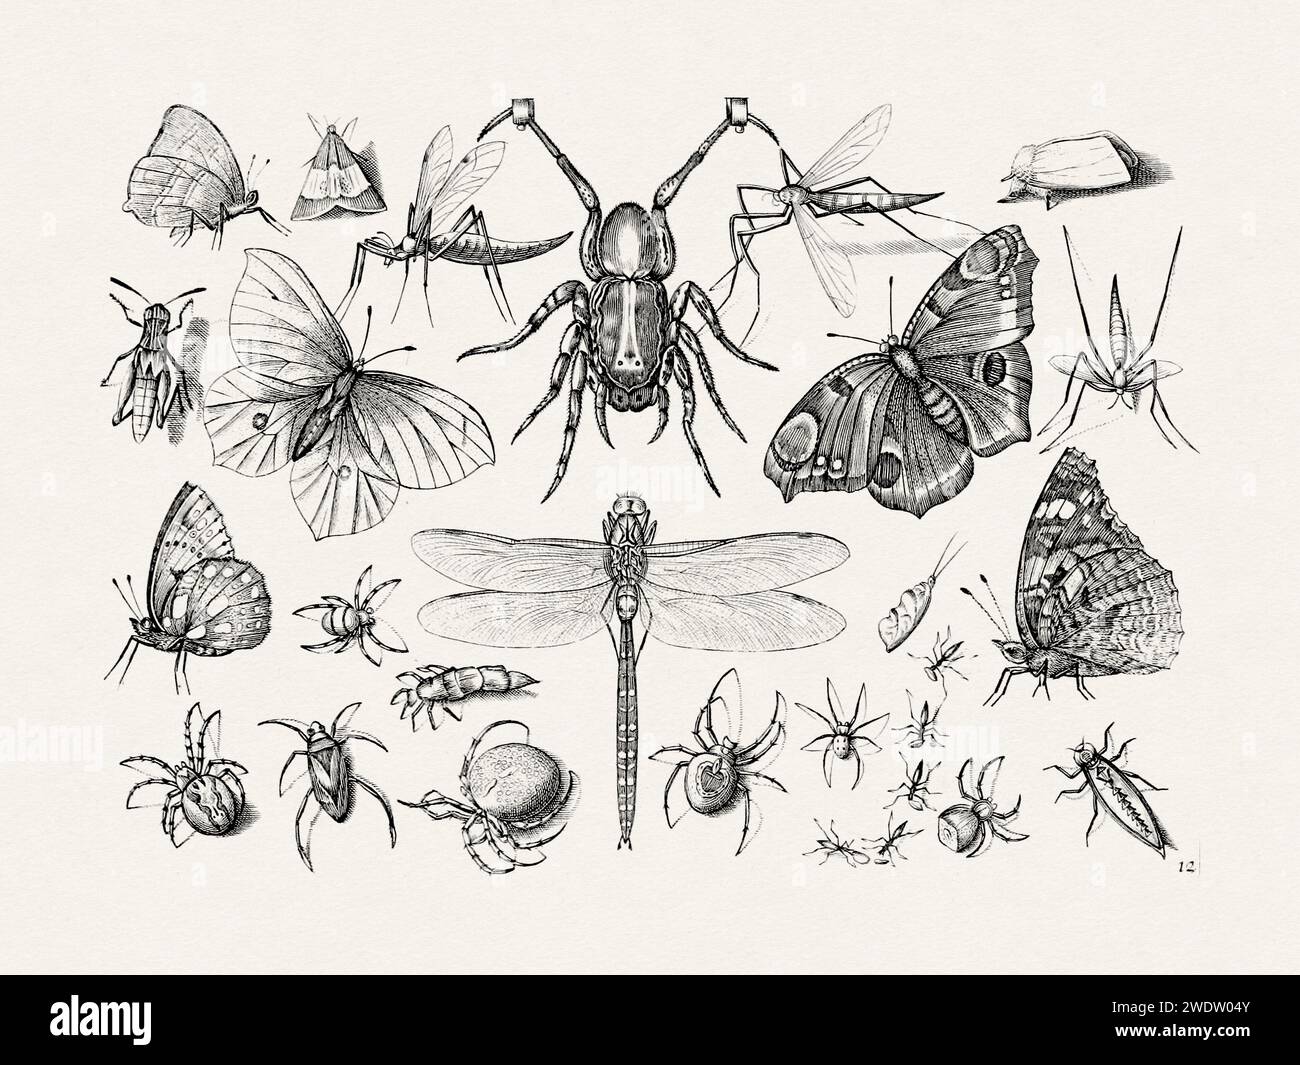 Antique Bugs Illustration: 17th-Century Insects by Jacob Hoefnagel - Butterflies, Dragonflies, Beetles, Flies, Spiders, and More. Stock Photo